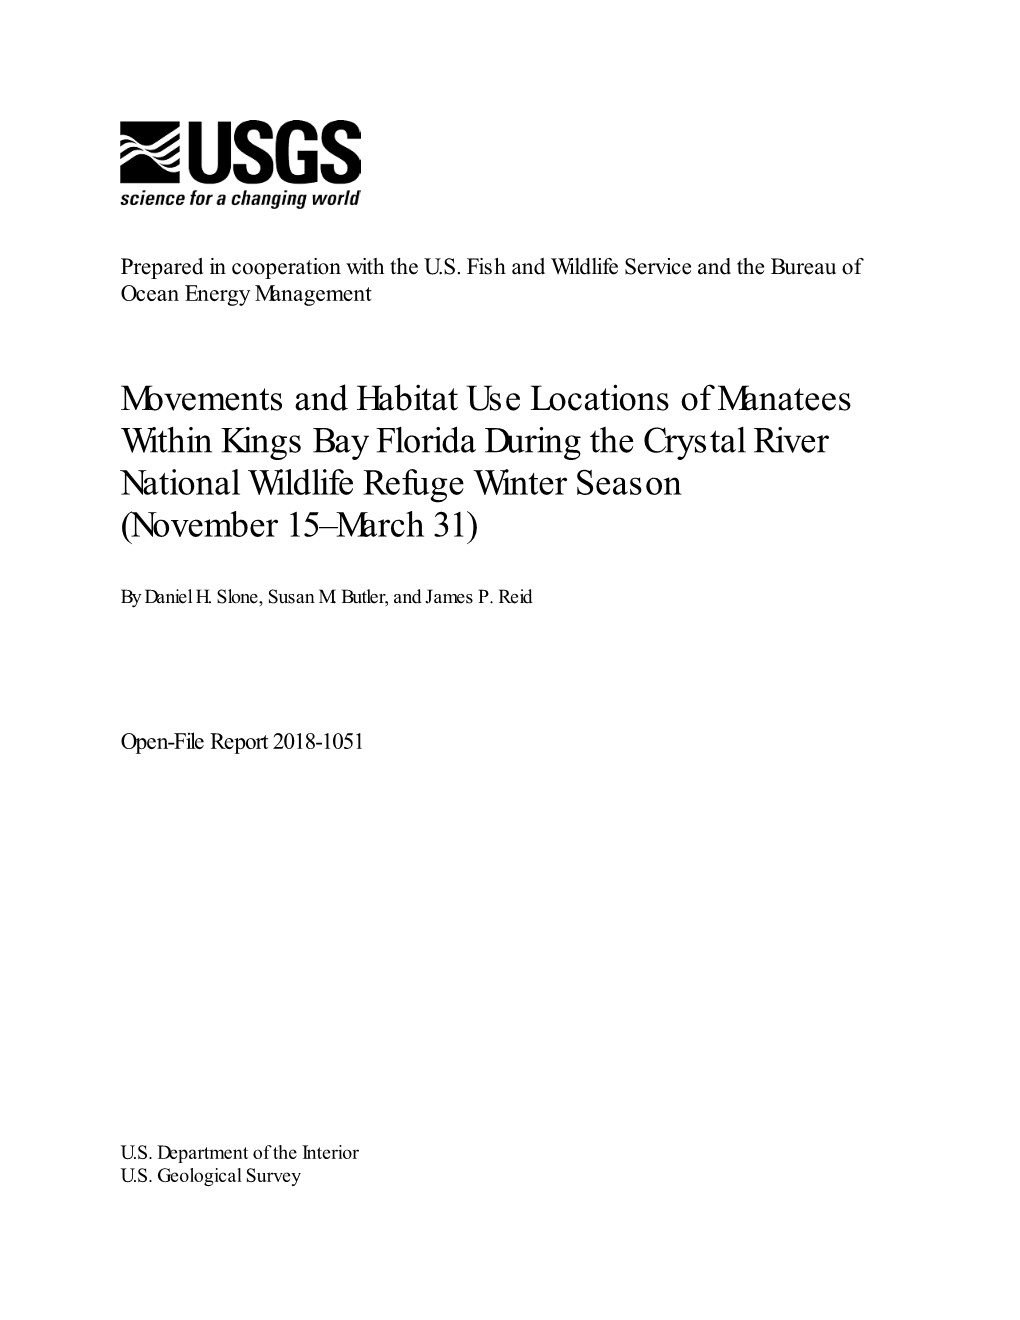 Movements and Habitat Use Locations of Manatees Within Kings Bay Florida During the Crystal River National Wildlife Refuge Winter Season (November 15–March 31)